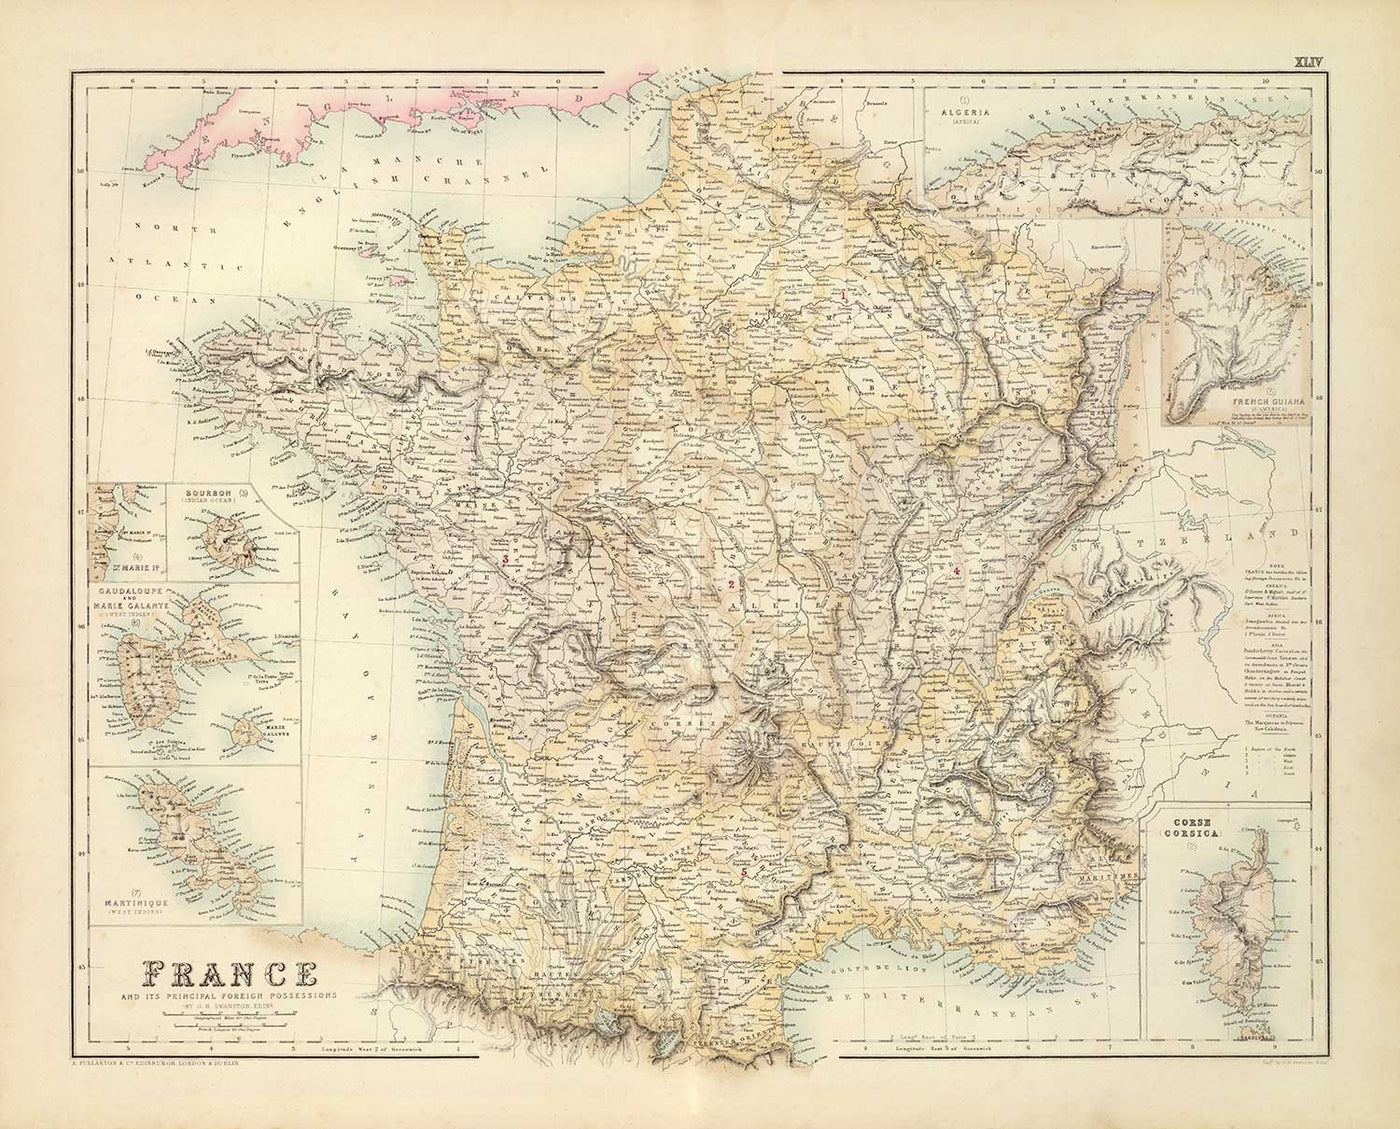 Old Map of France and its Foreign Possessions, 1872 by Archibald Fullarton - Algeria, French Guiana, Corsica, The Alps, Martinique